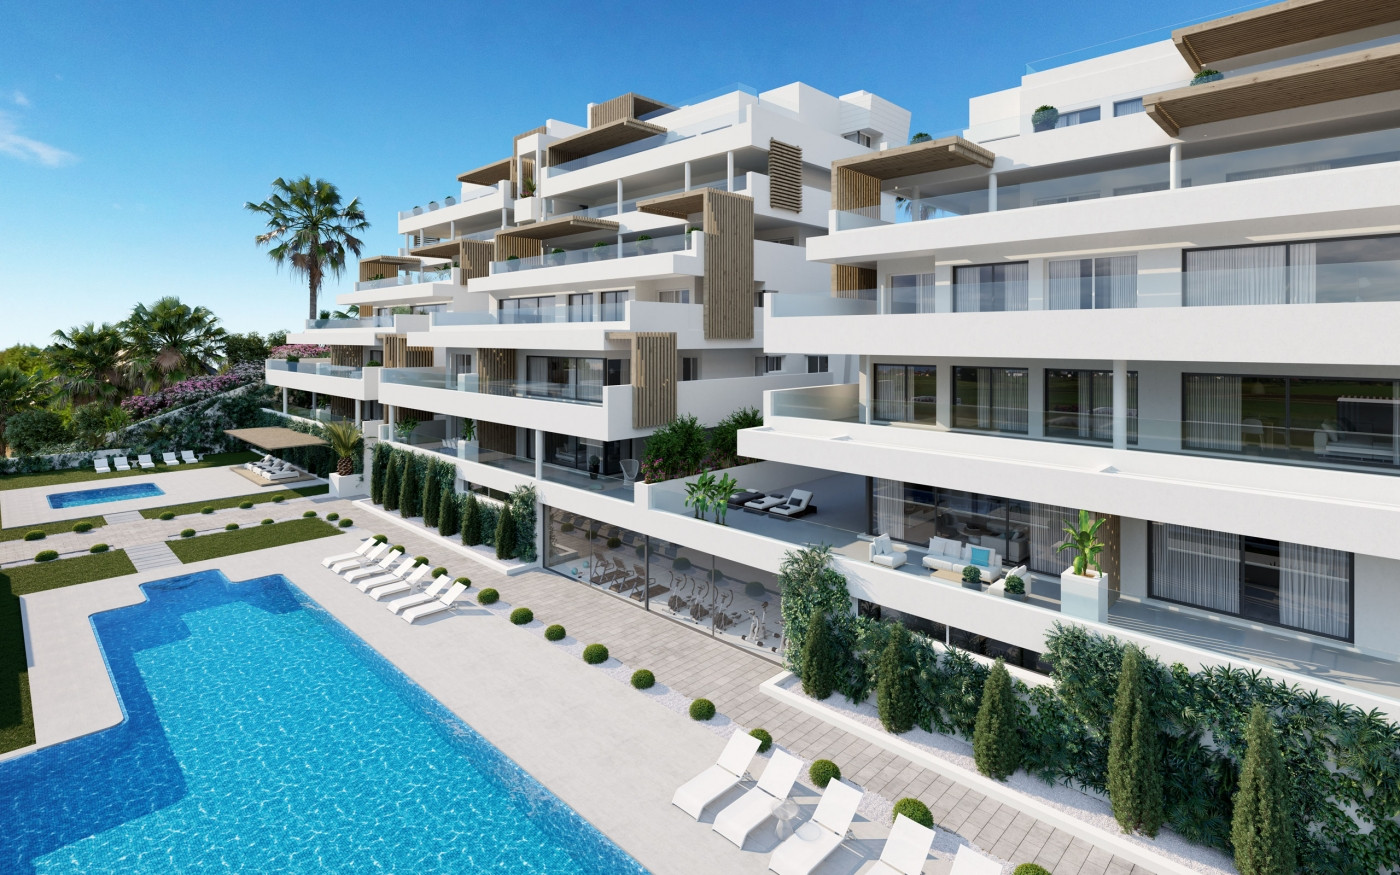 Apartments and penthouses with panoramic seaviews and walking distance to everything in Estepona.PL141